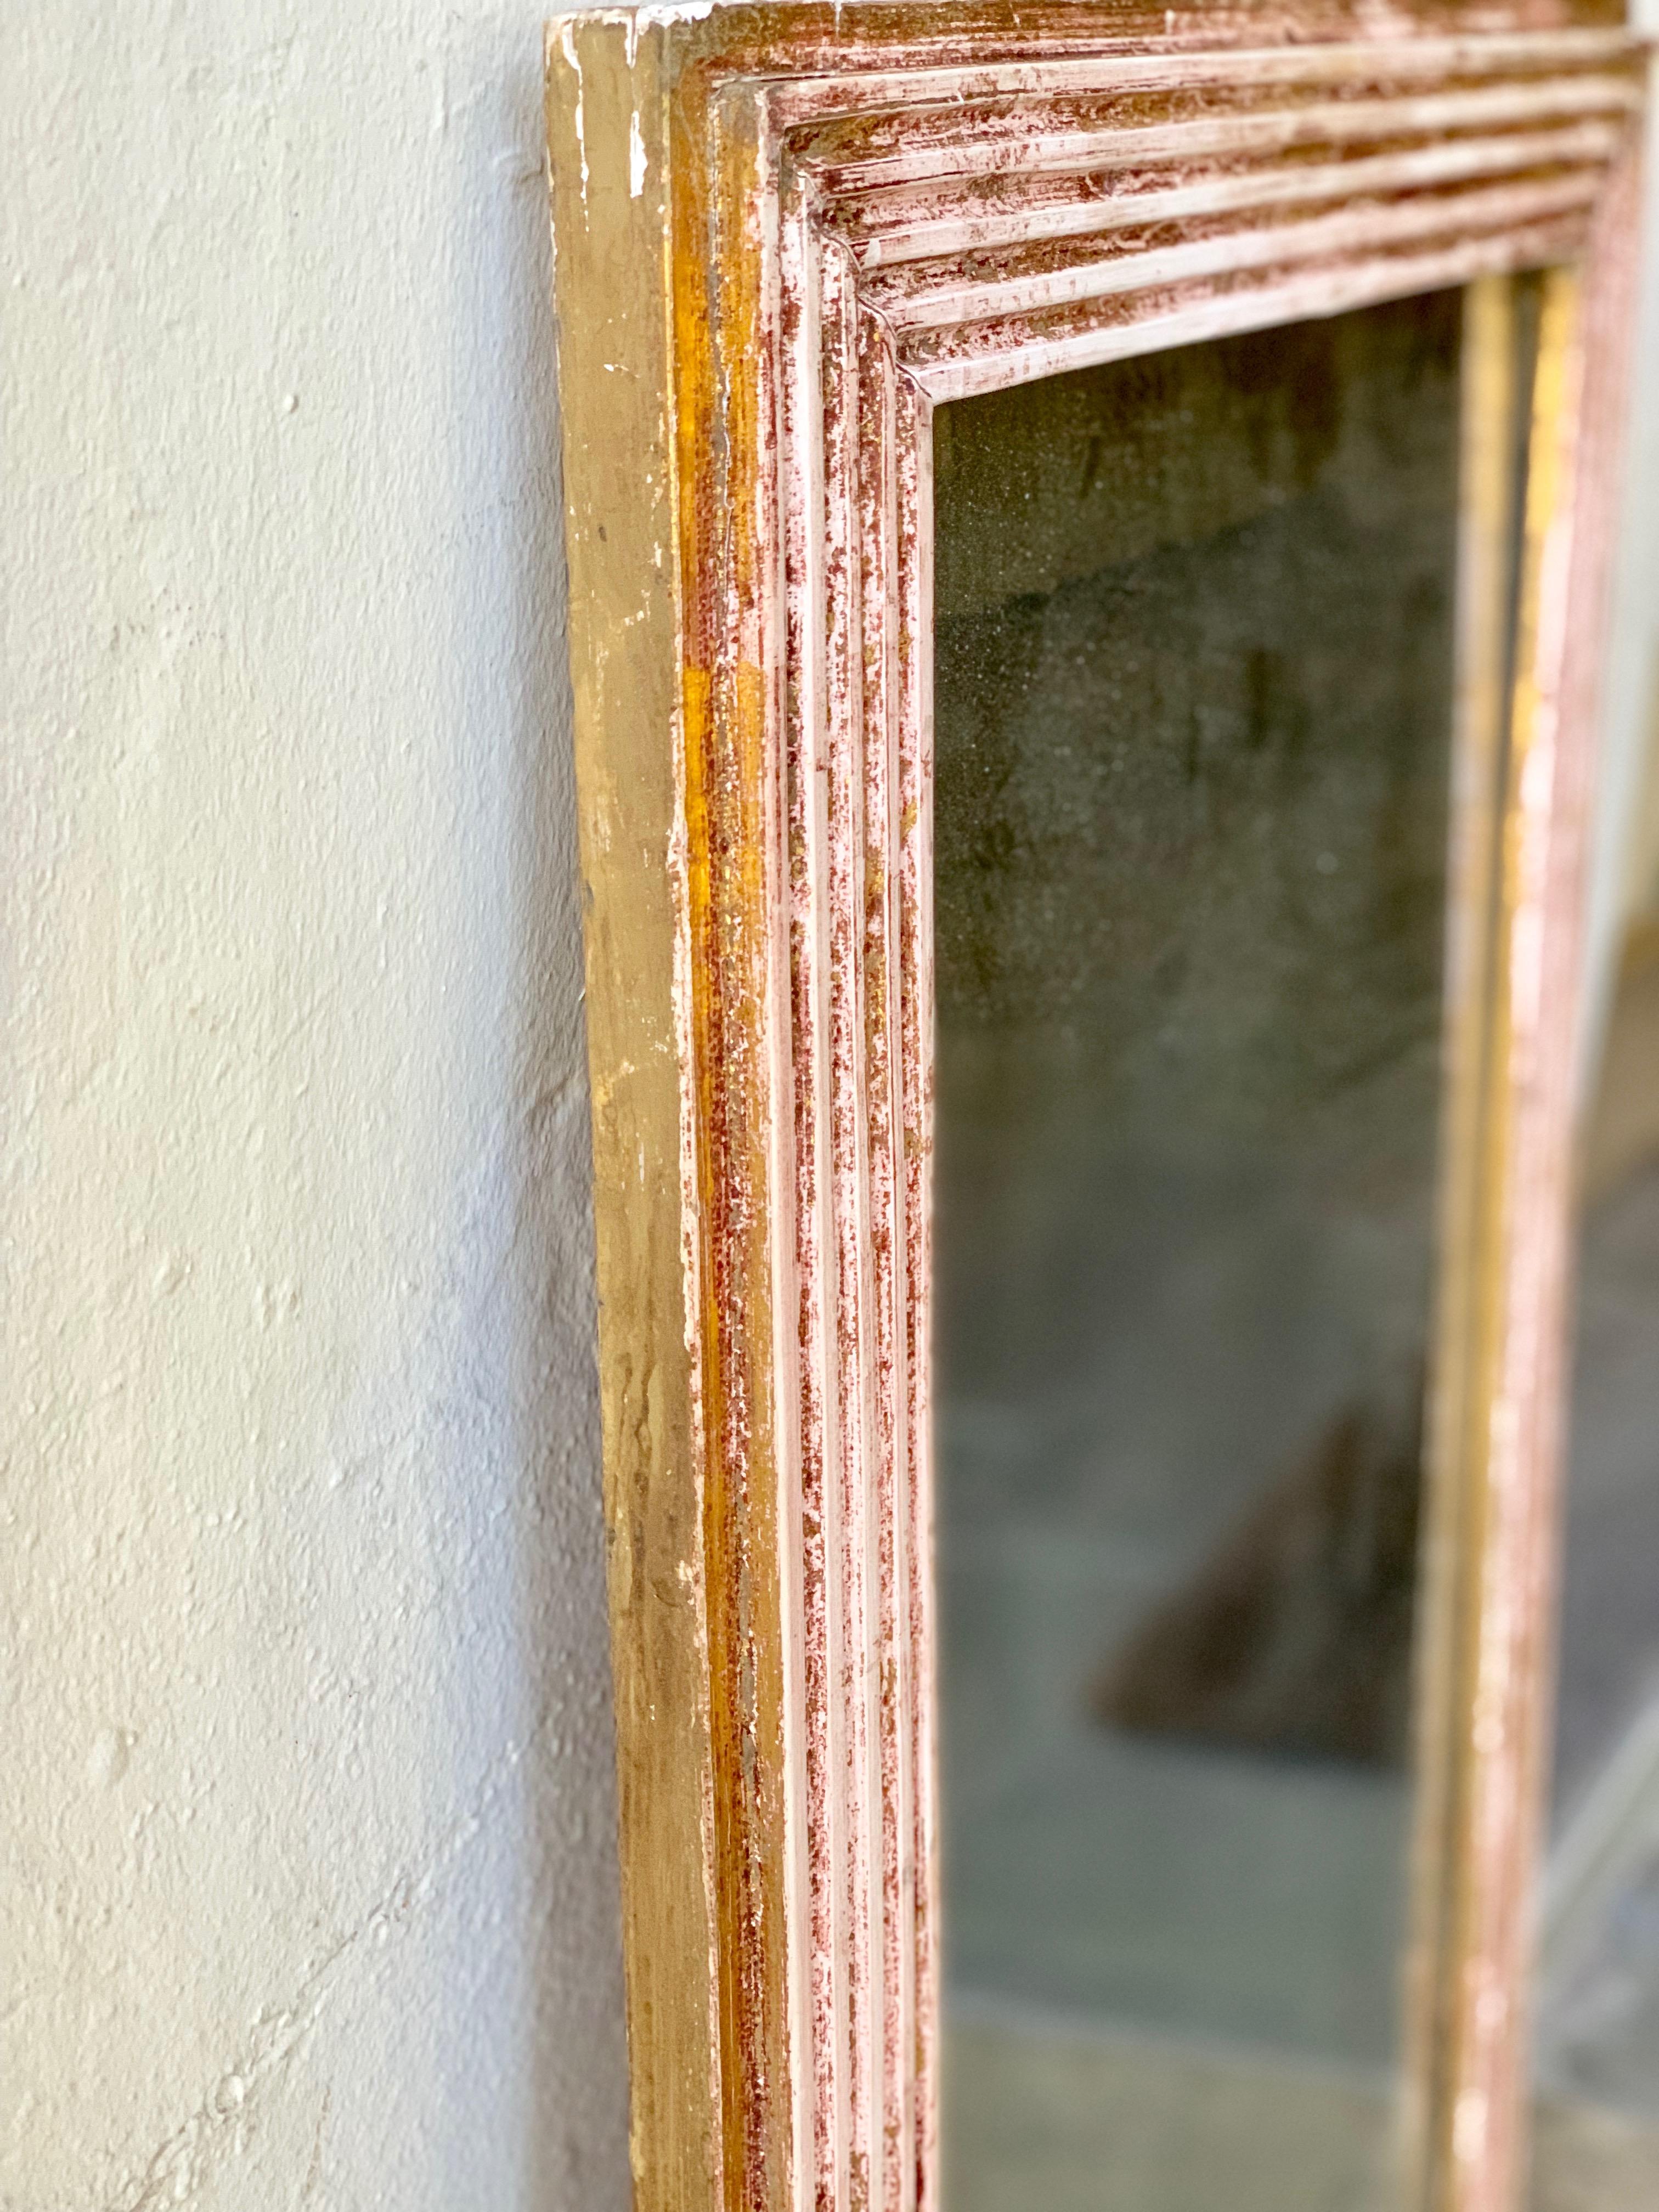 A 19th century French Directoire mirror with some original gilded accenting. The frame is carved, highlighting the gilding and the mercury glass.